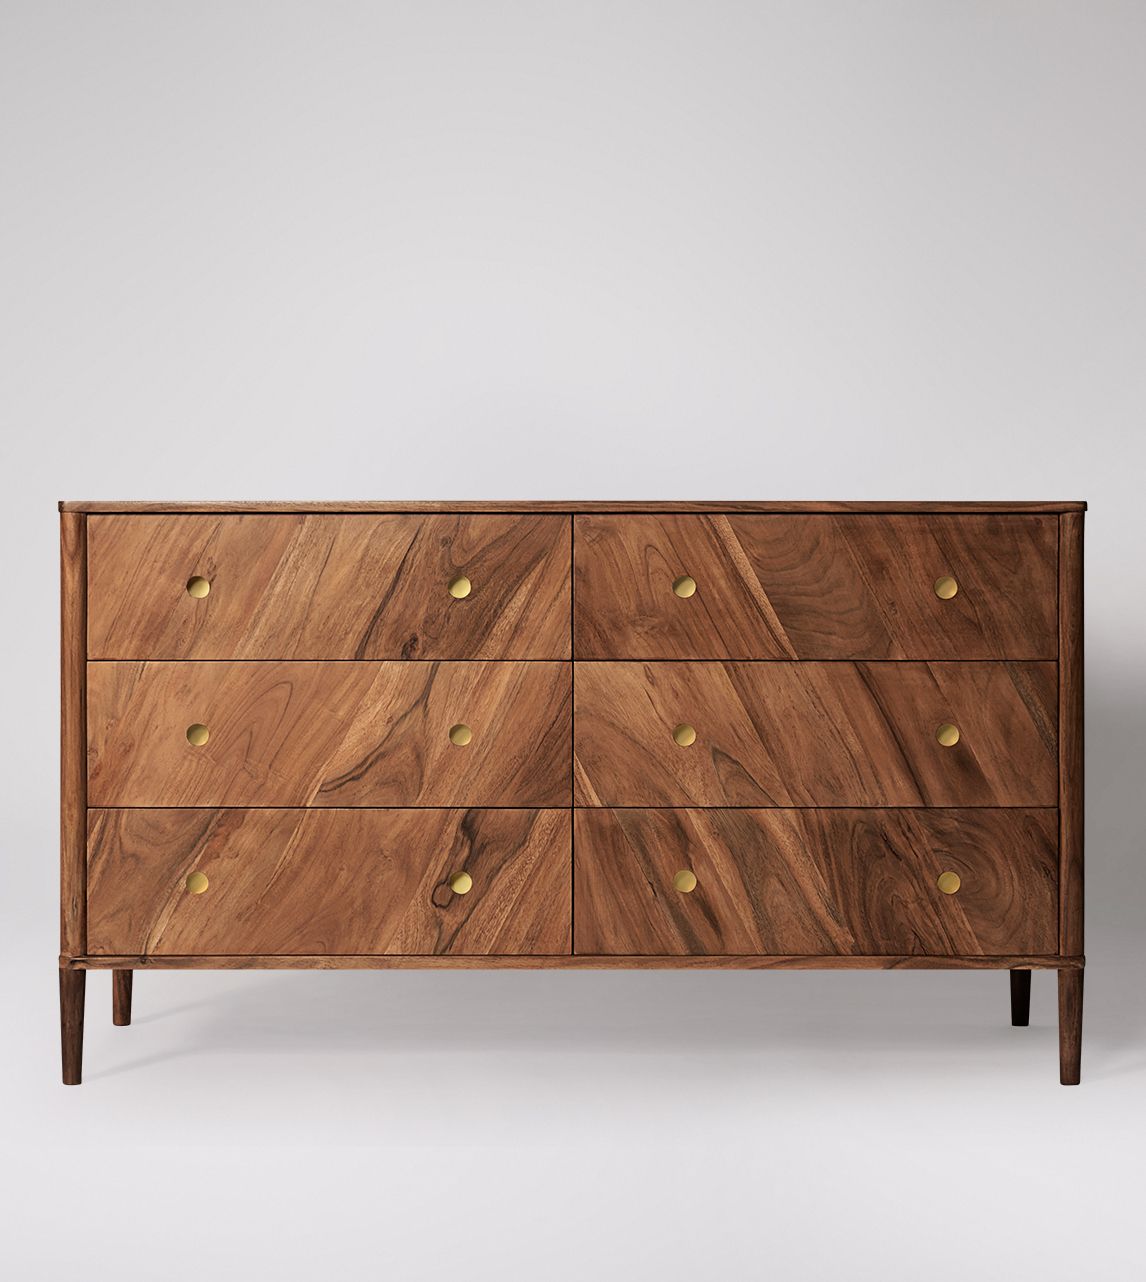 Shale MidCentury Style SixDrawer Chest of Drawers in Acacia & Brass